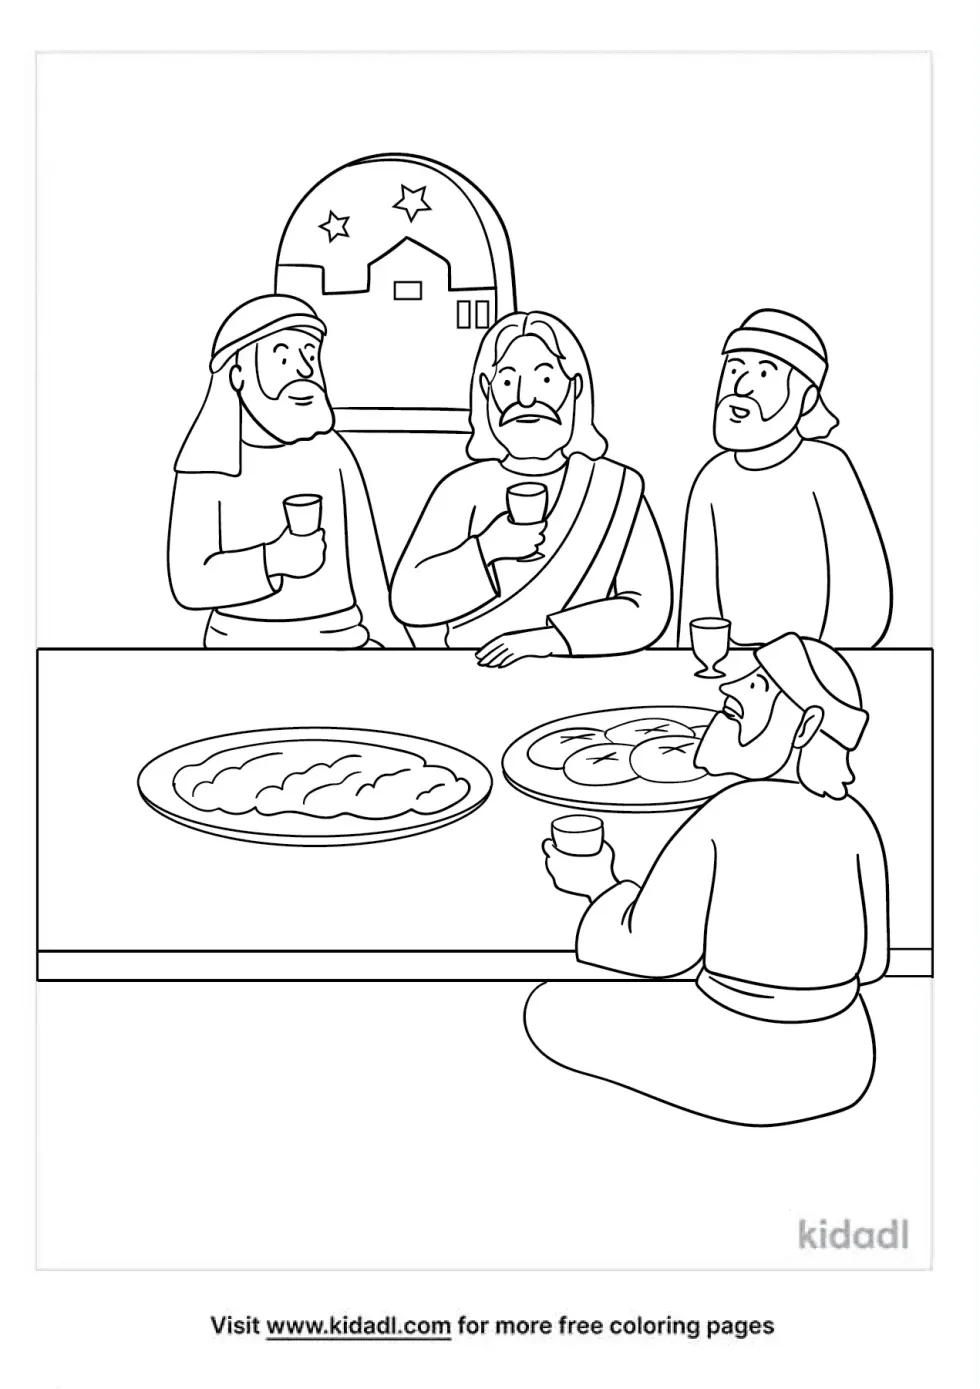 Last Supper Coloring Page